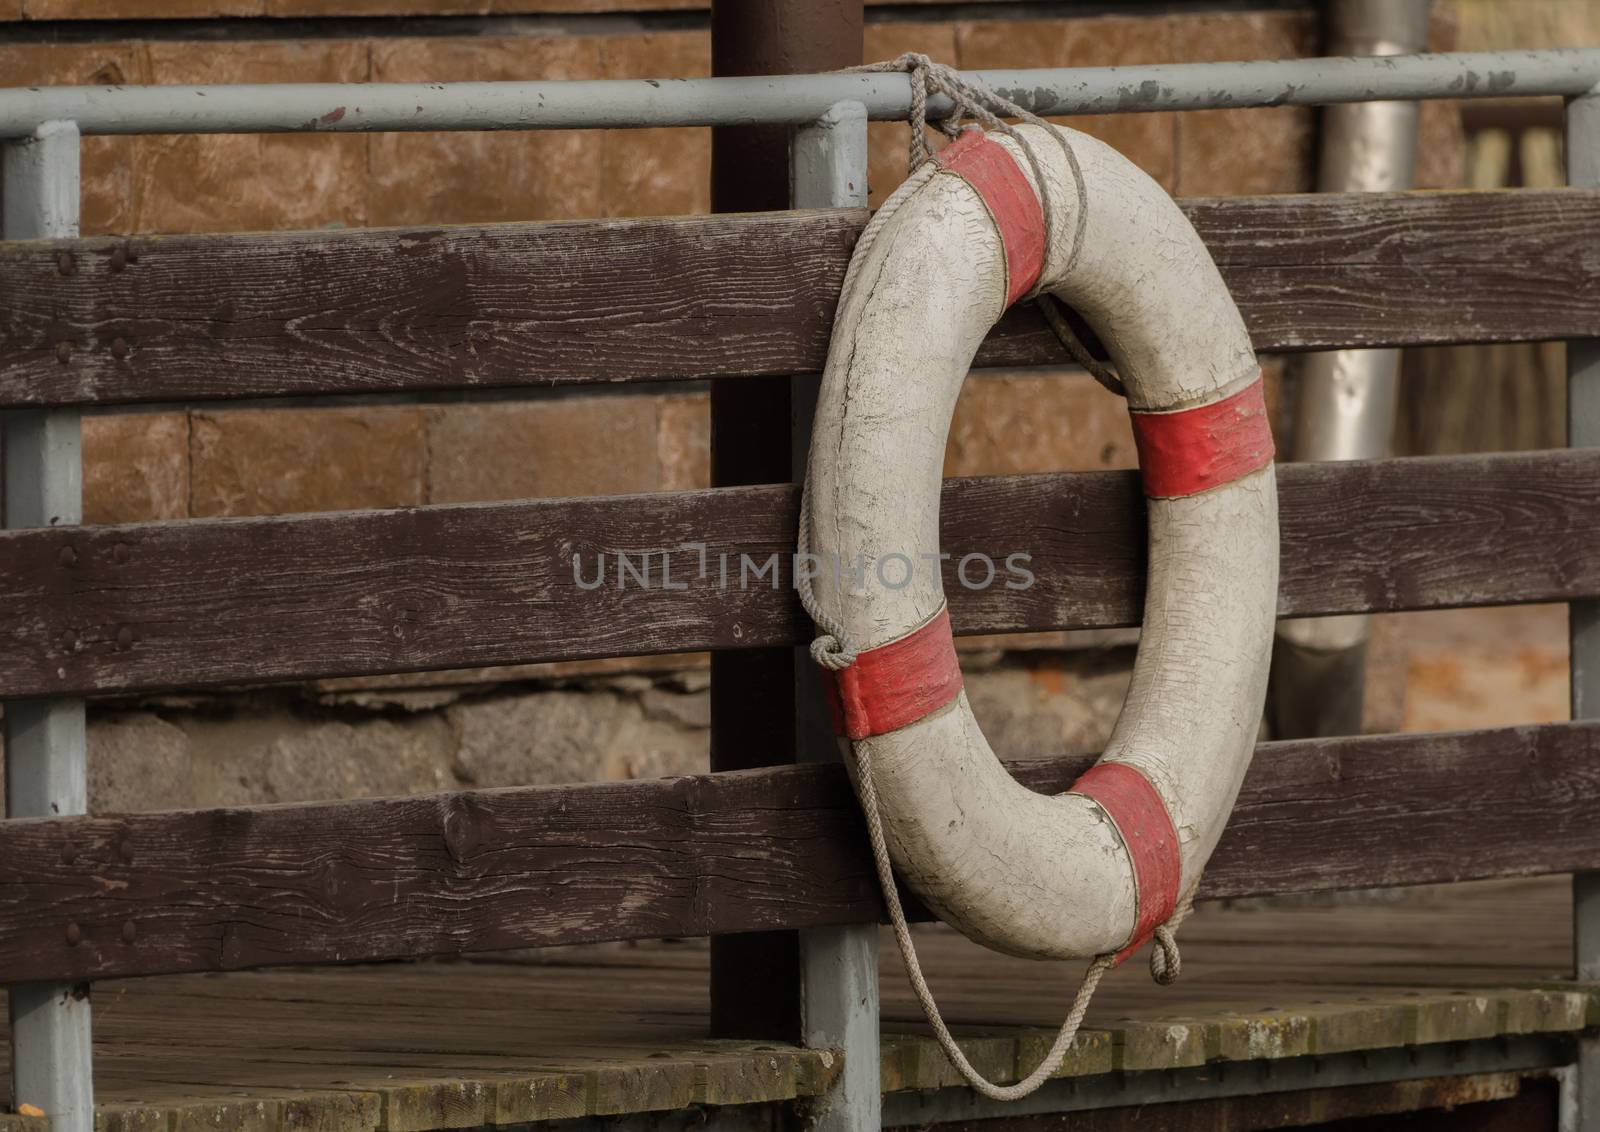 A rescue ring hangs on the bridge